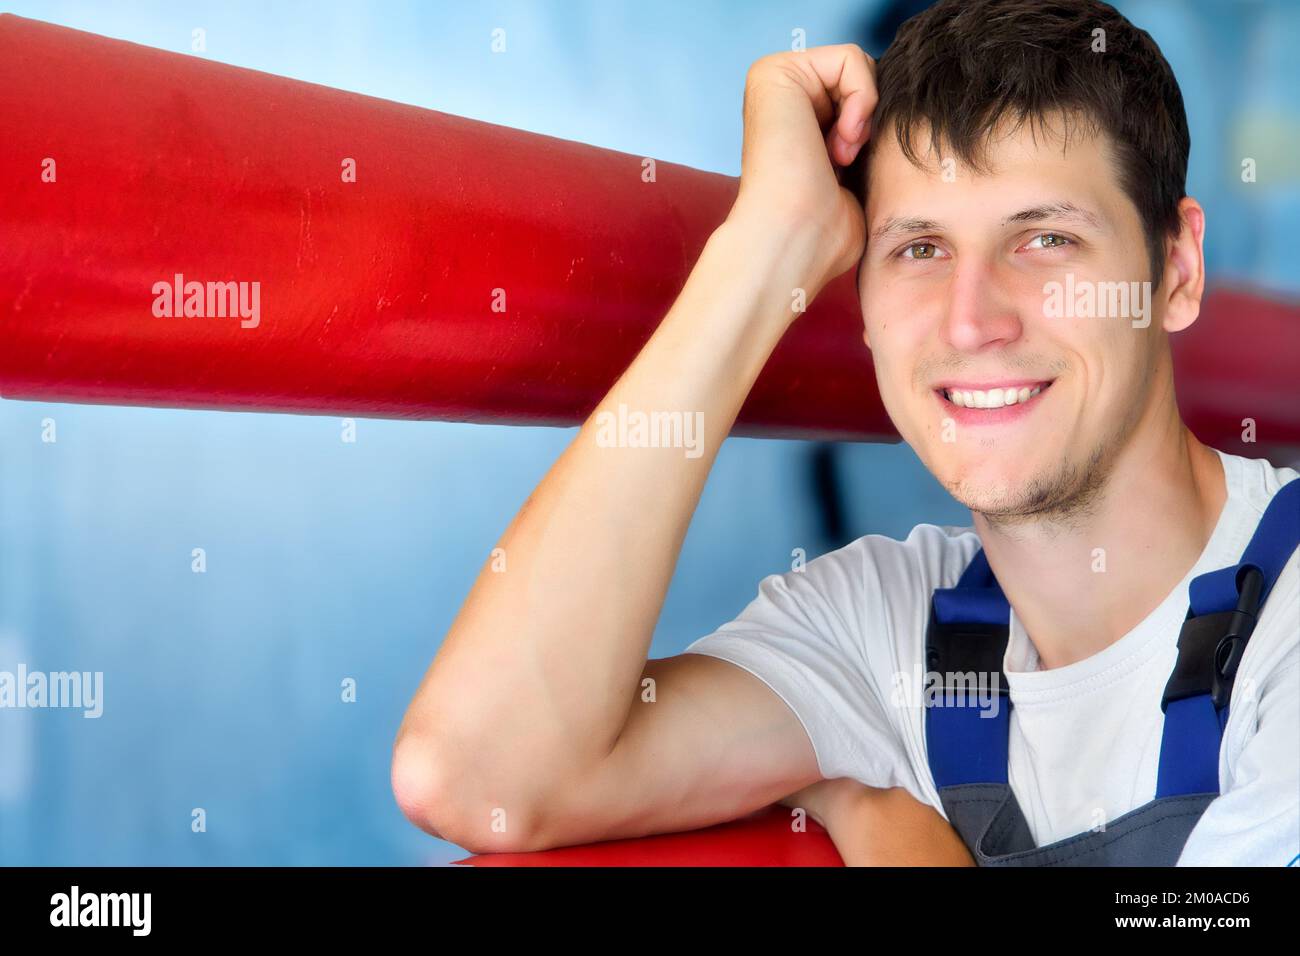 Young Caucasian worker smiles and looks into camera. Portrait of Caucasian man 30 years old. Leaning on red pipe inside room. Genuine happy worker. Stock Photo